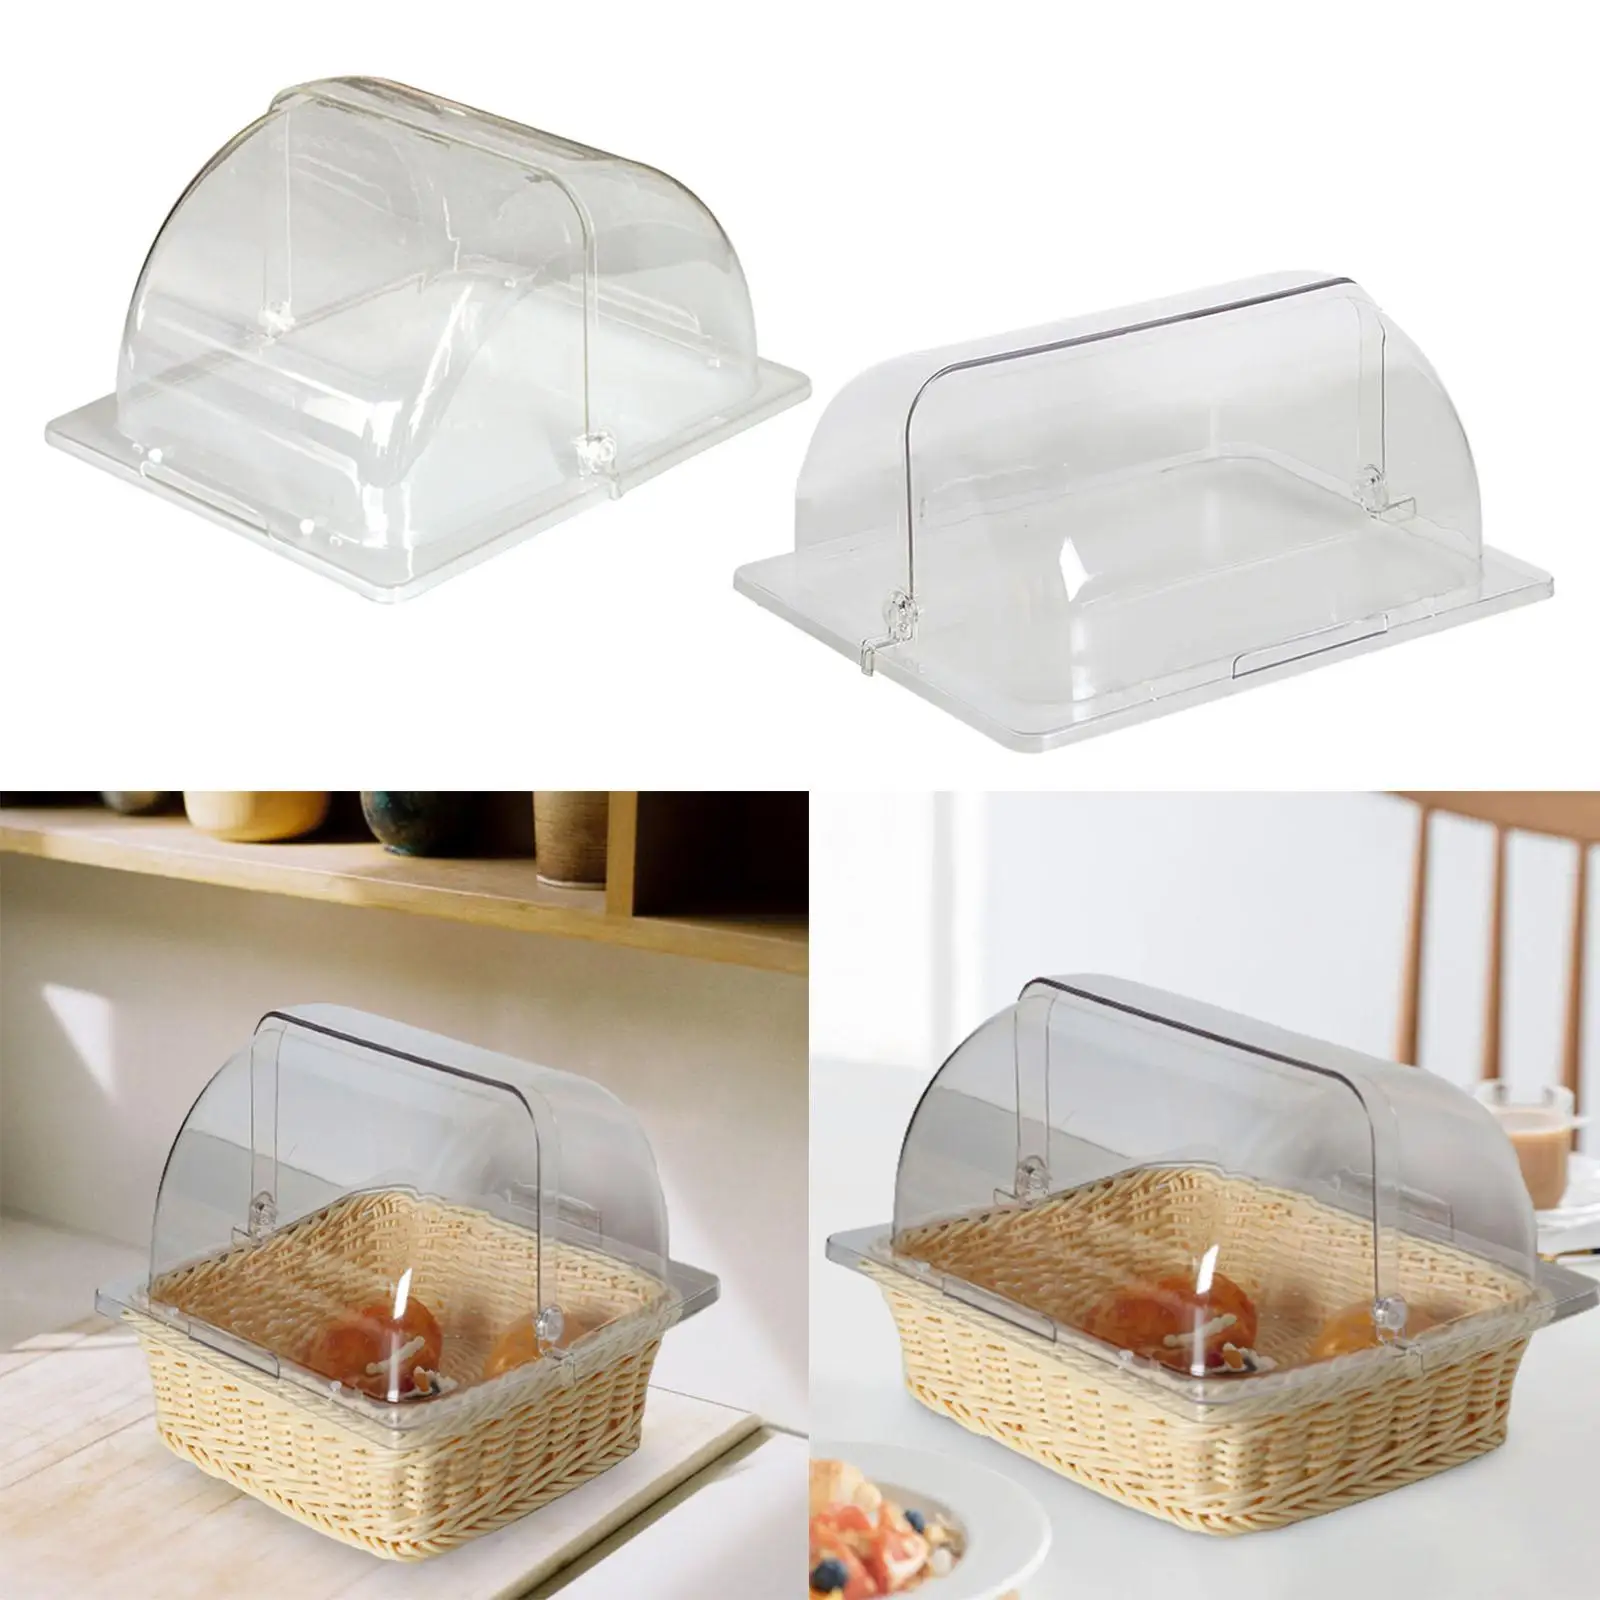 Food Cover Rectangular Clear Baking Accessories Protector Lid PC Plastic Pastry Cover for Home Weddings Bakery Countertop Cheese